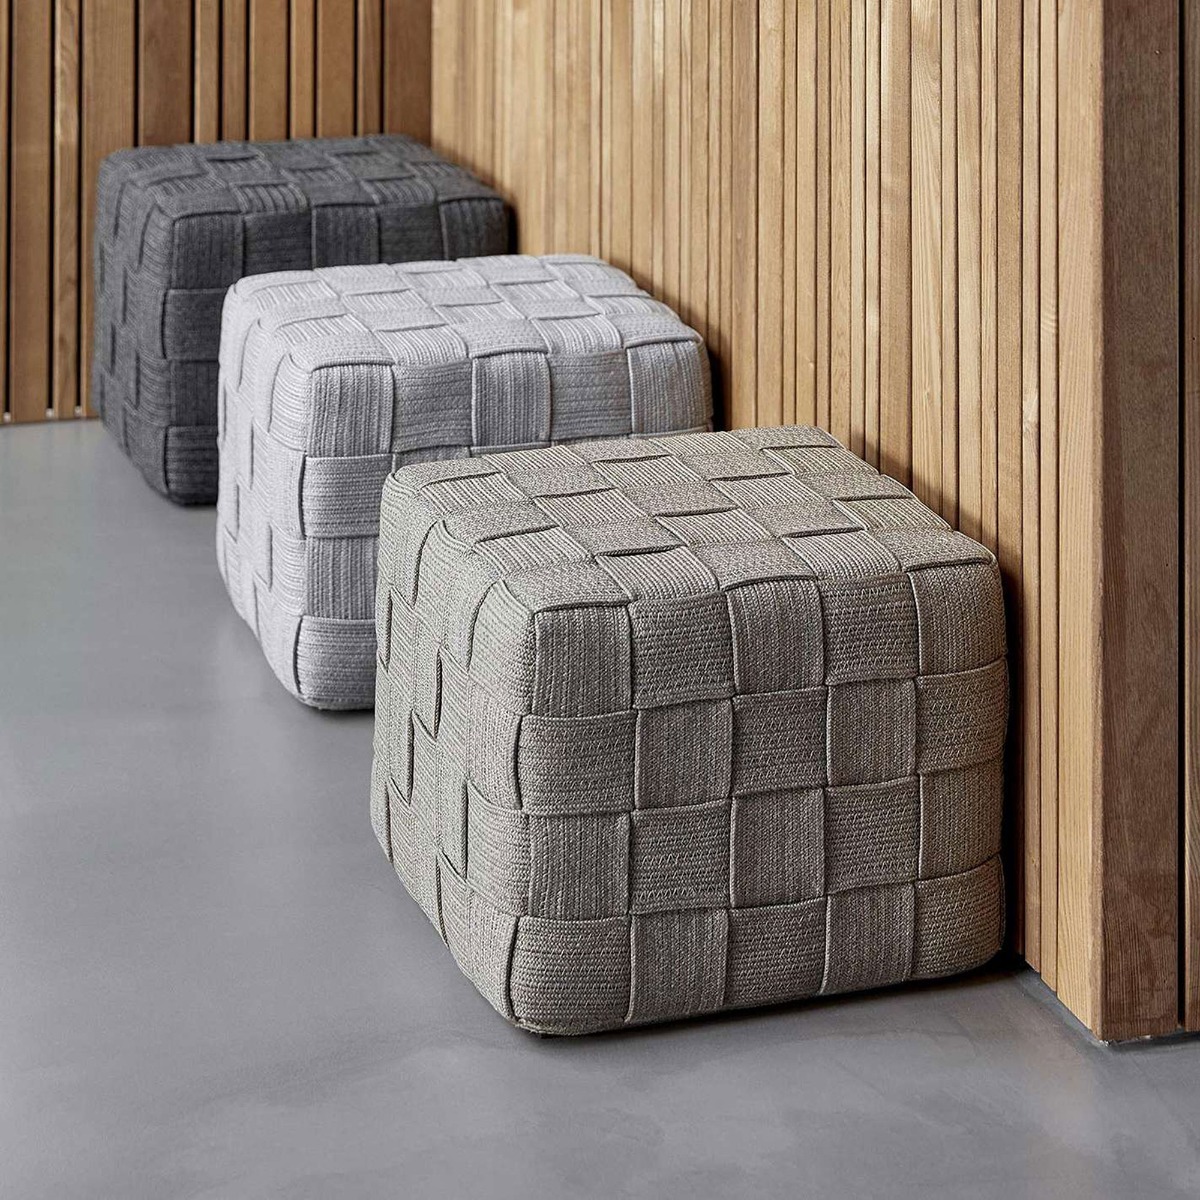 Cane Line Cube Footstool, Square, Grey | Barker & Stonehouse